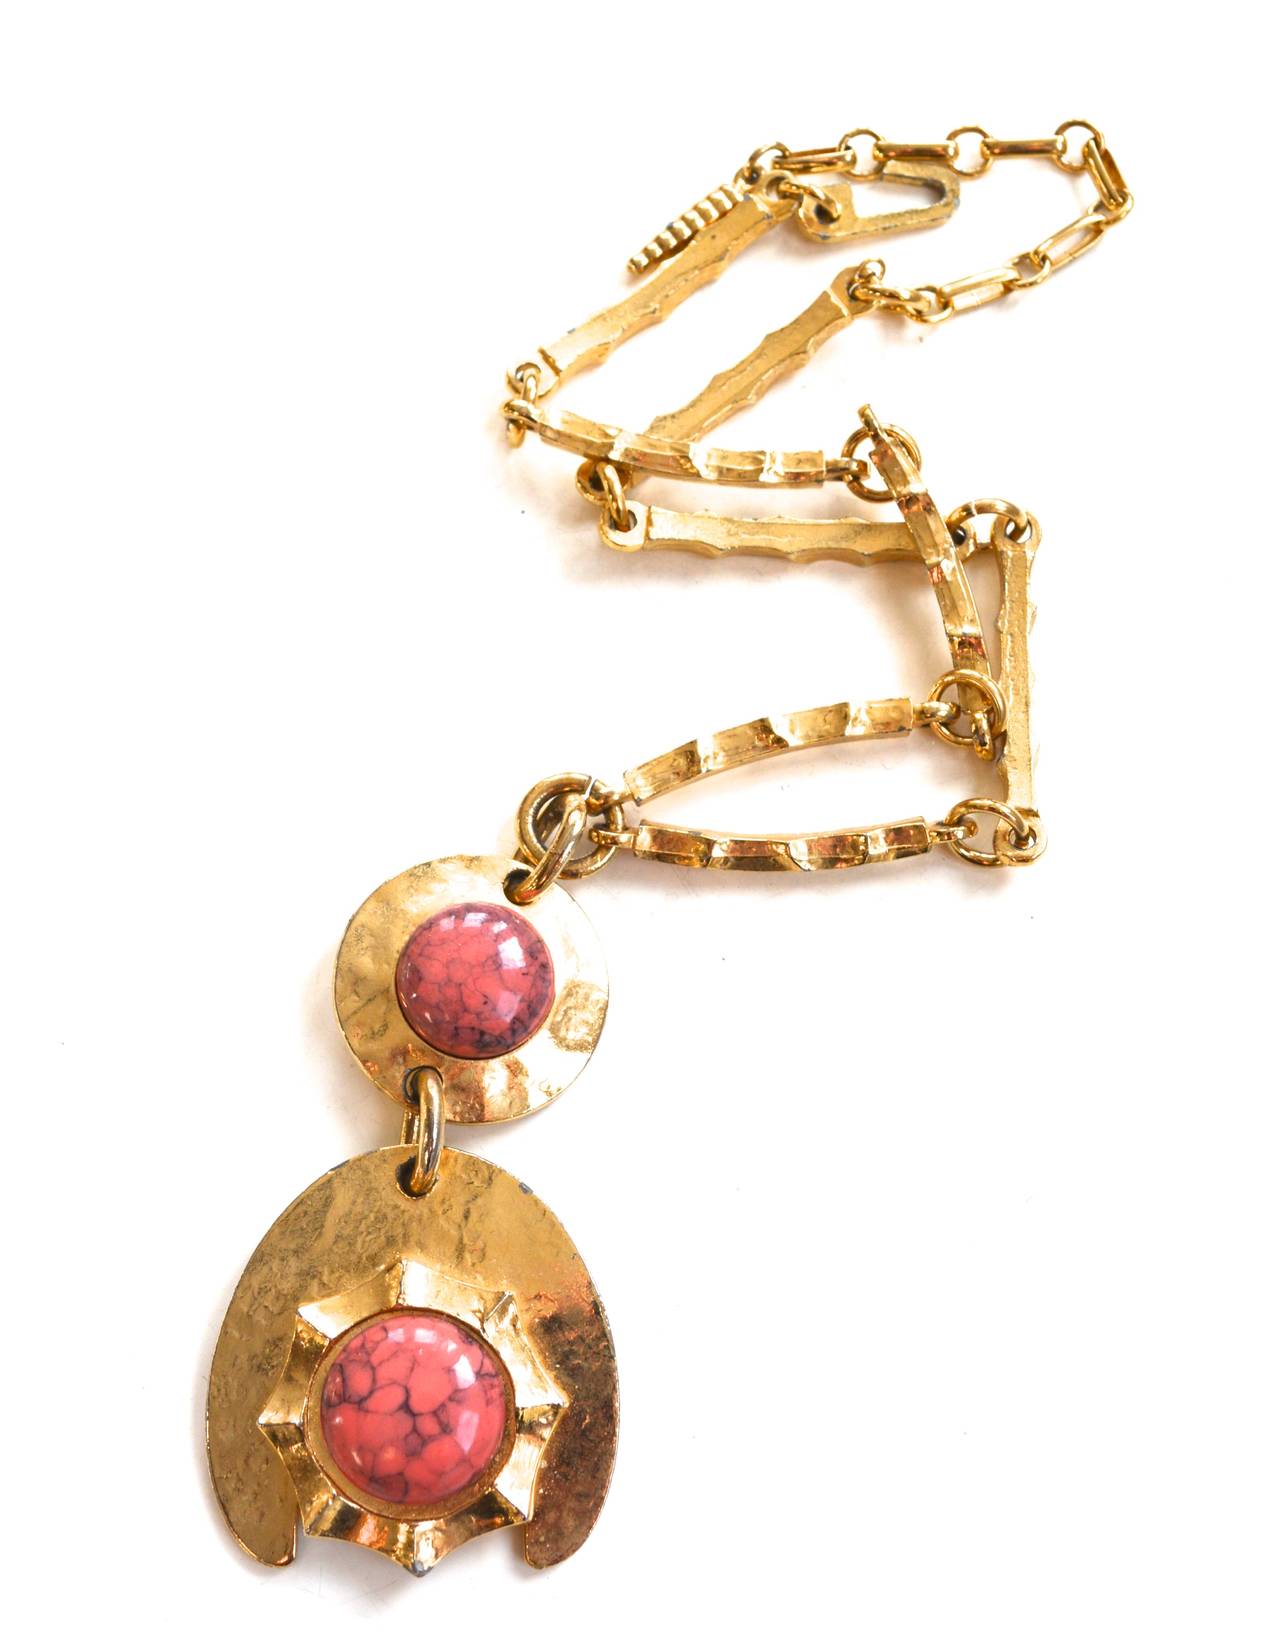 Vintage pink glass cabochon and golden metal abstract signed Hobe necklace. Hook closure and mod links. Somewhat adjustable. Unique overall fashion influenced design. Chain is about 17